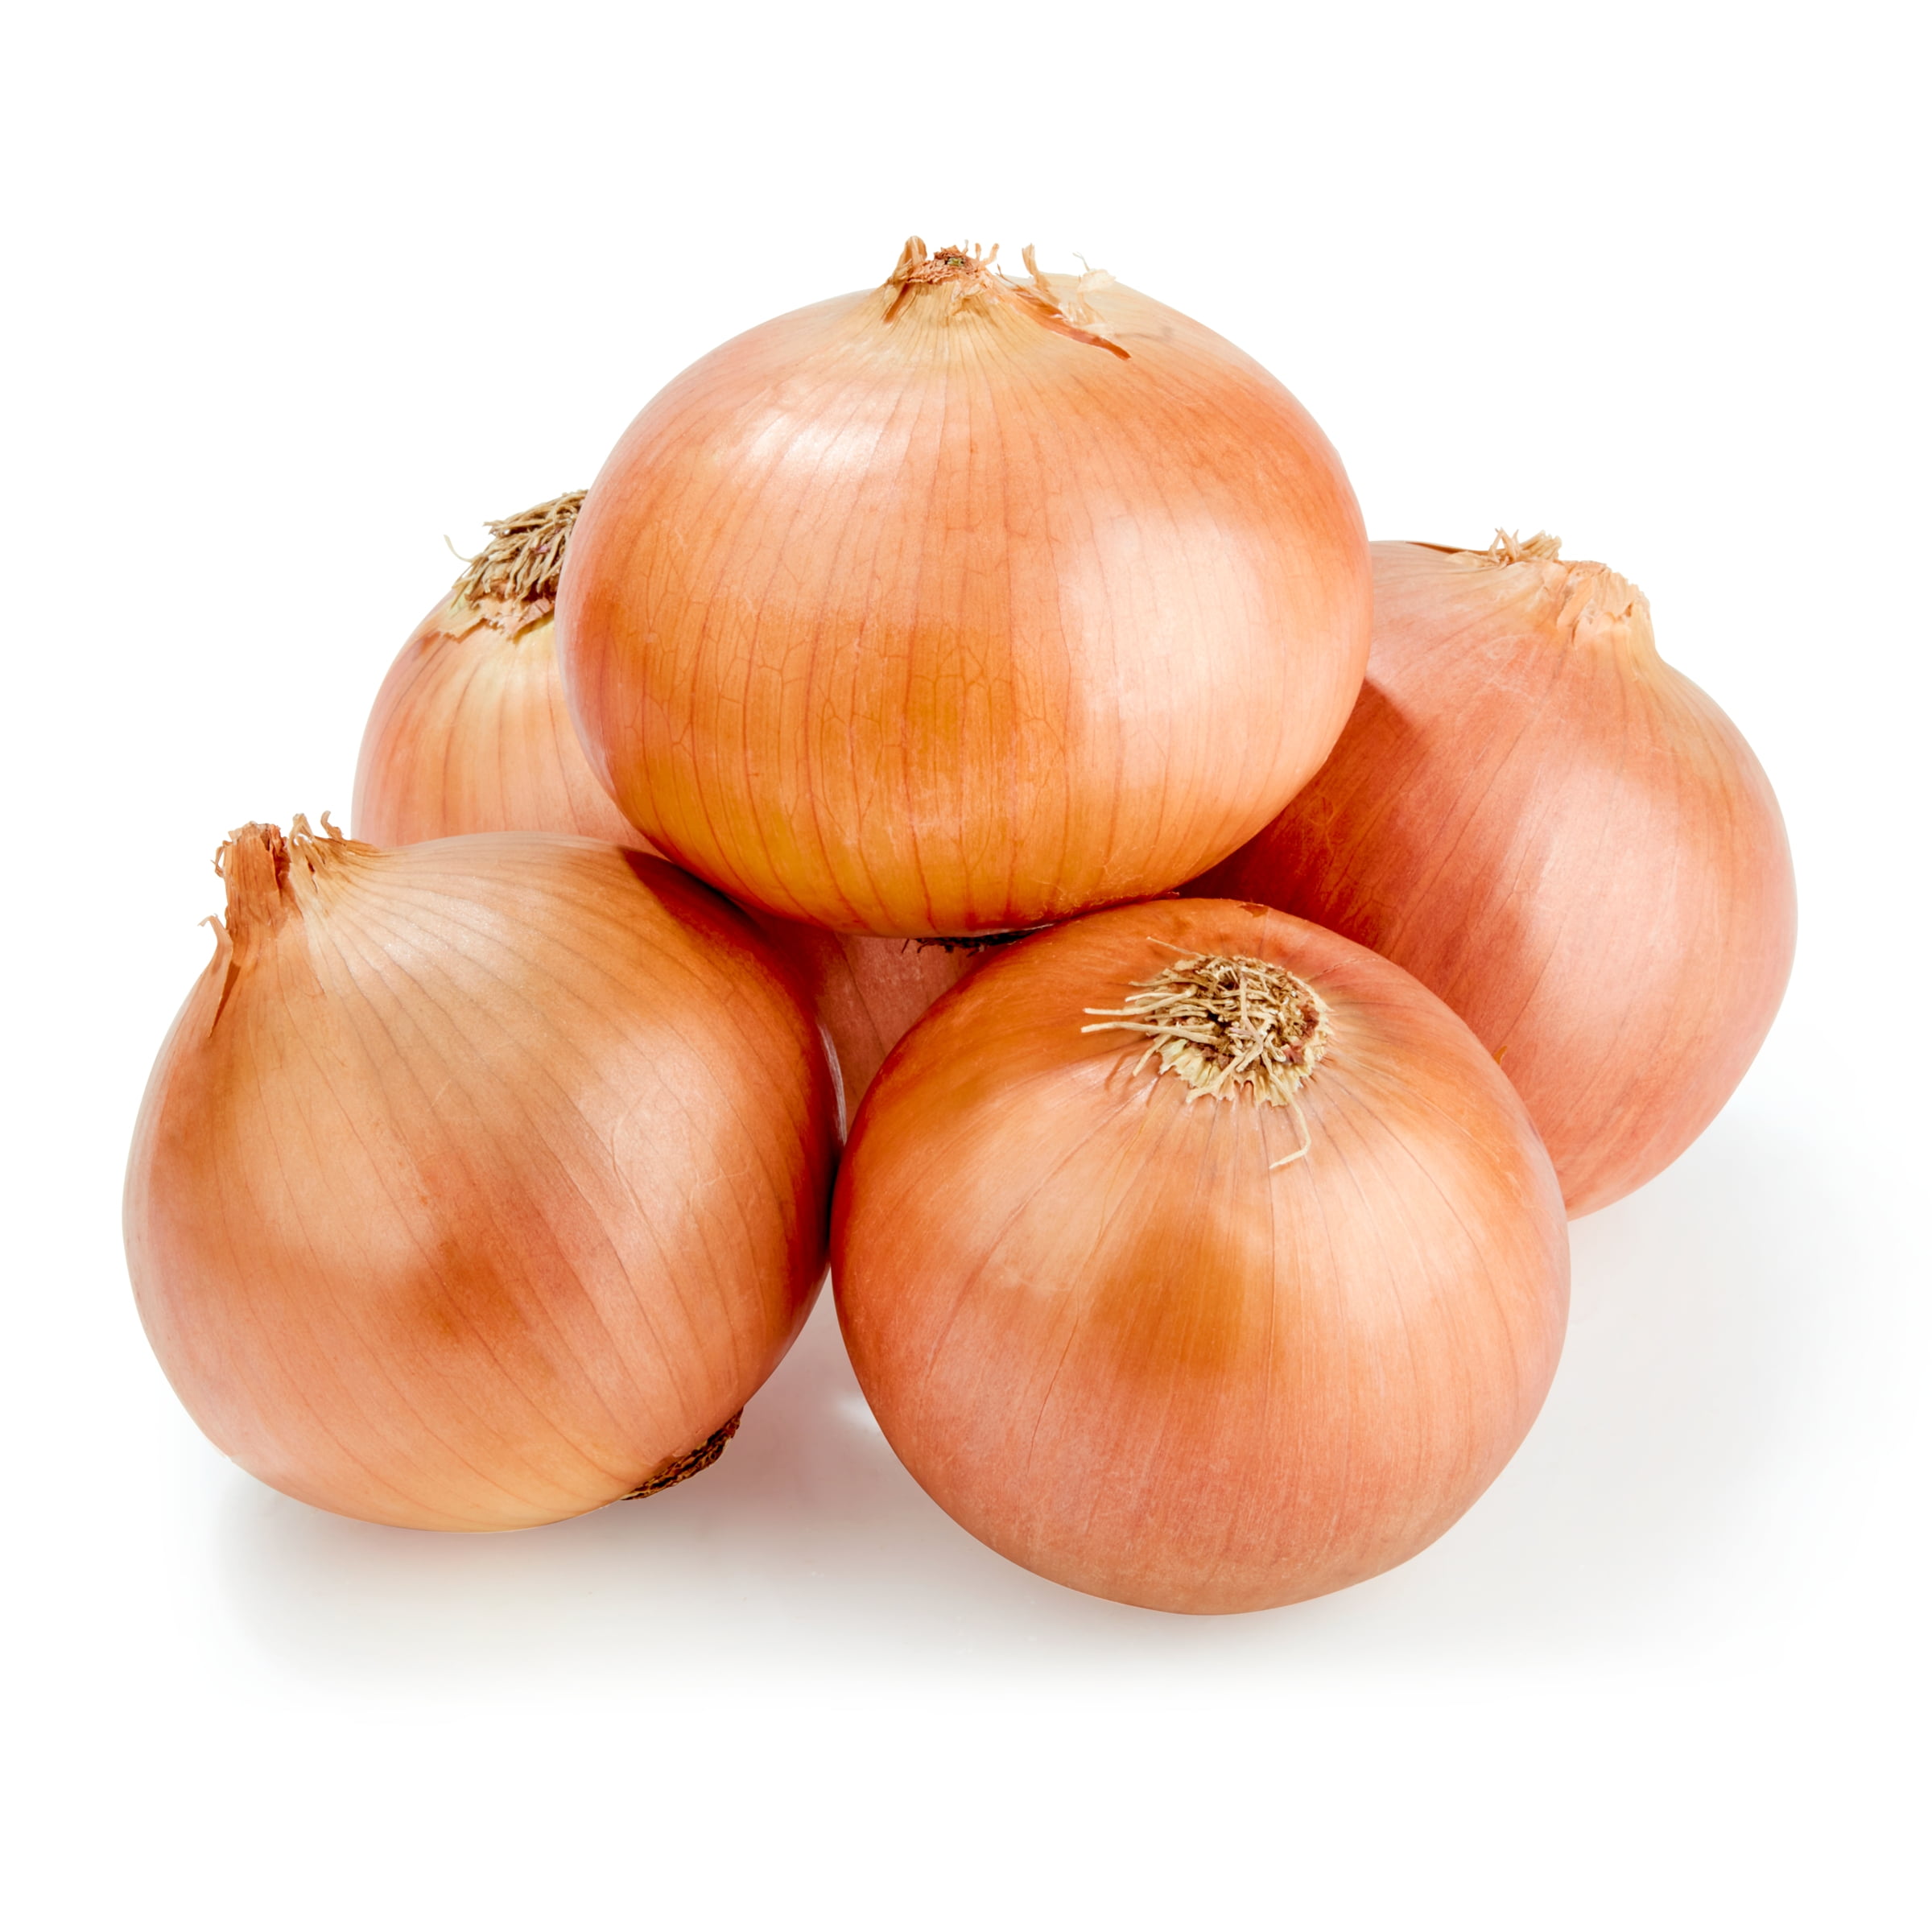 FRESH Red Onion 3 Pound Bag - Sold by bag